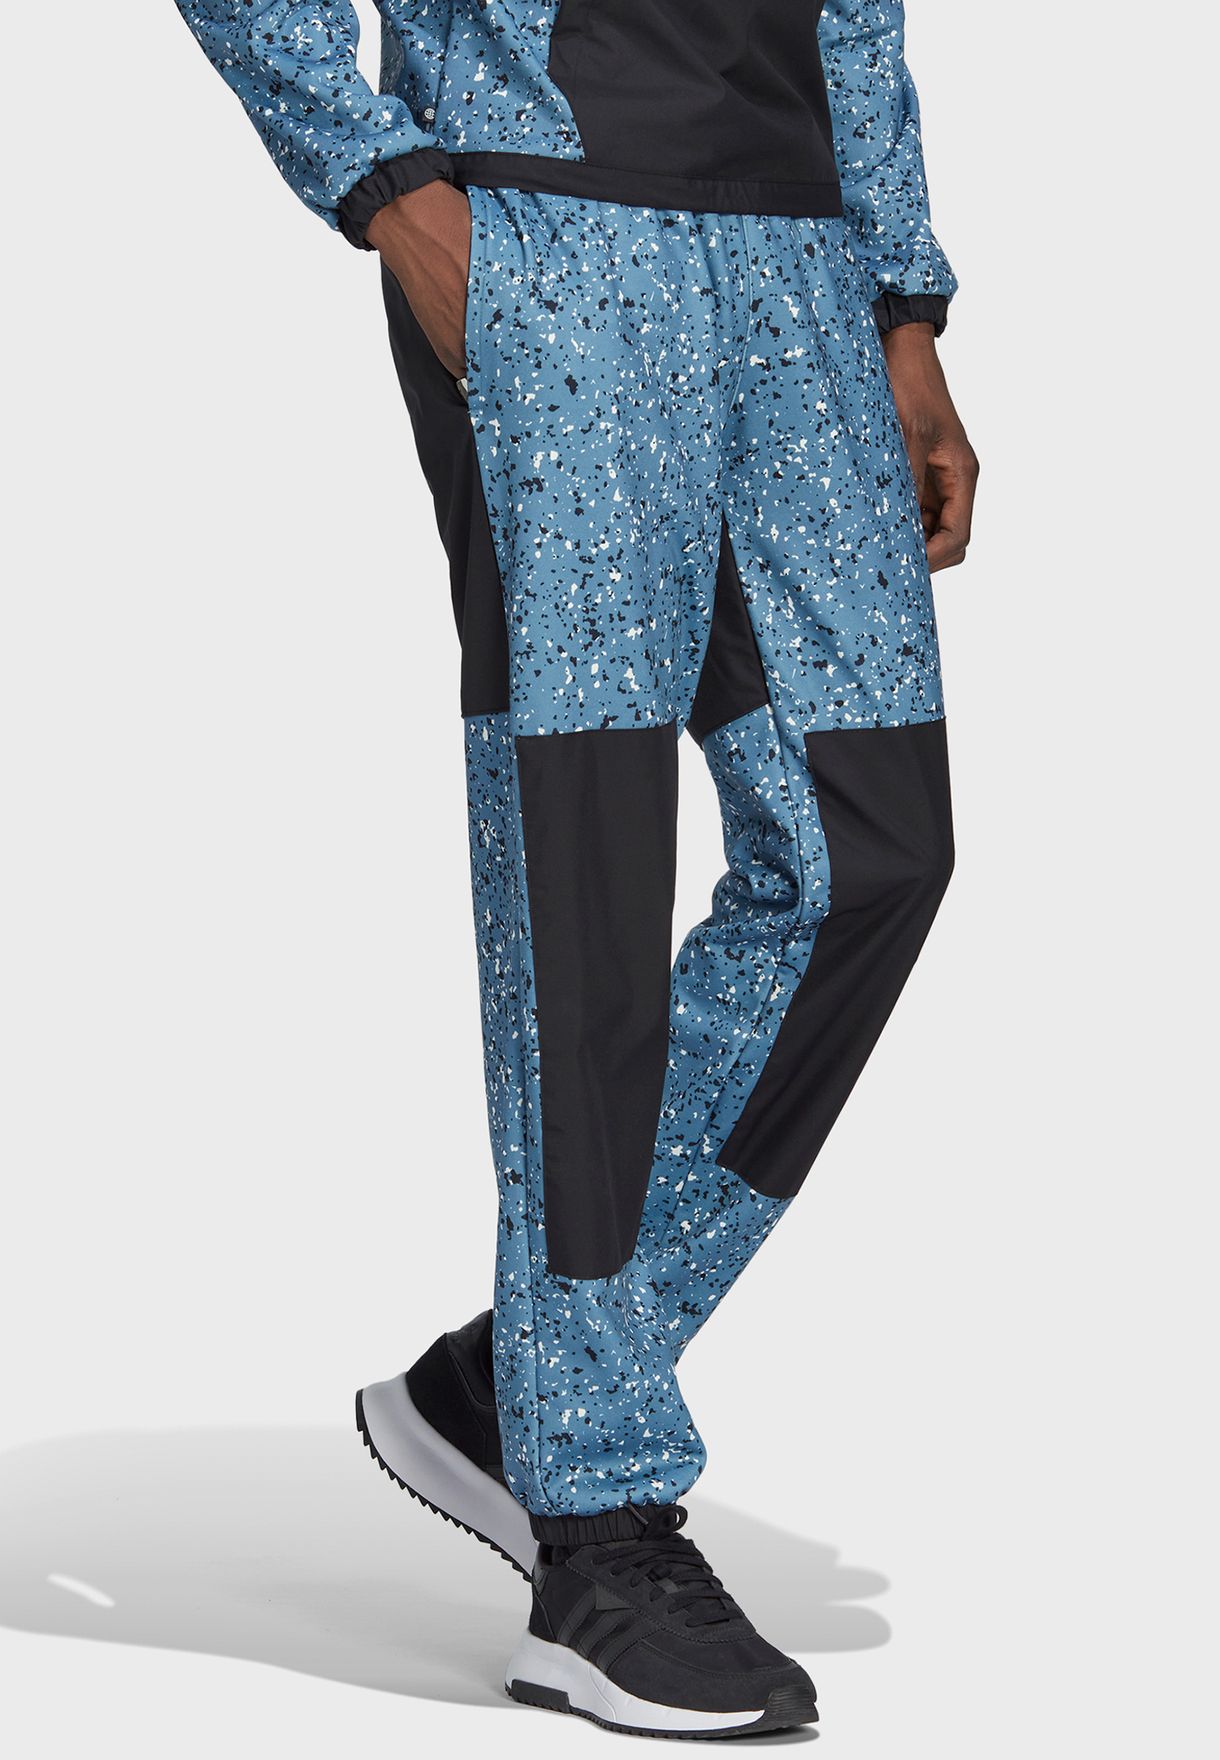 Adventure Winter All Over Printed Sweatpants